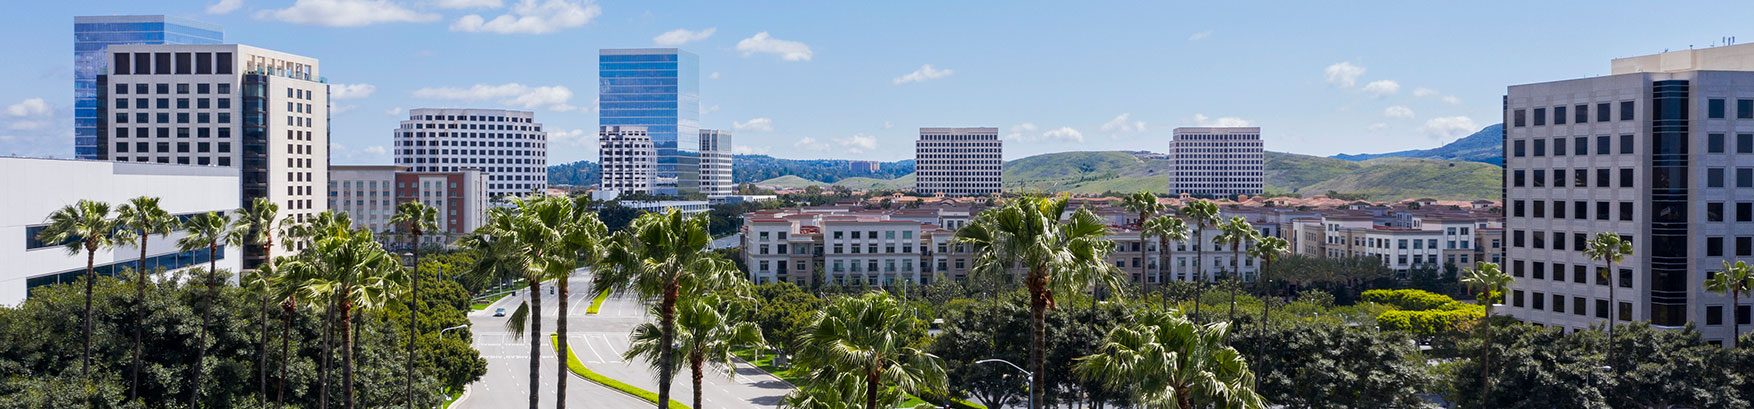 Panoramic view of tall office buildings and palm trees in Irvine